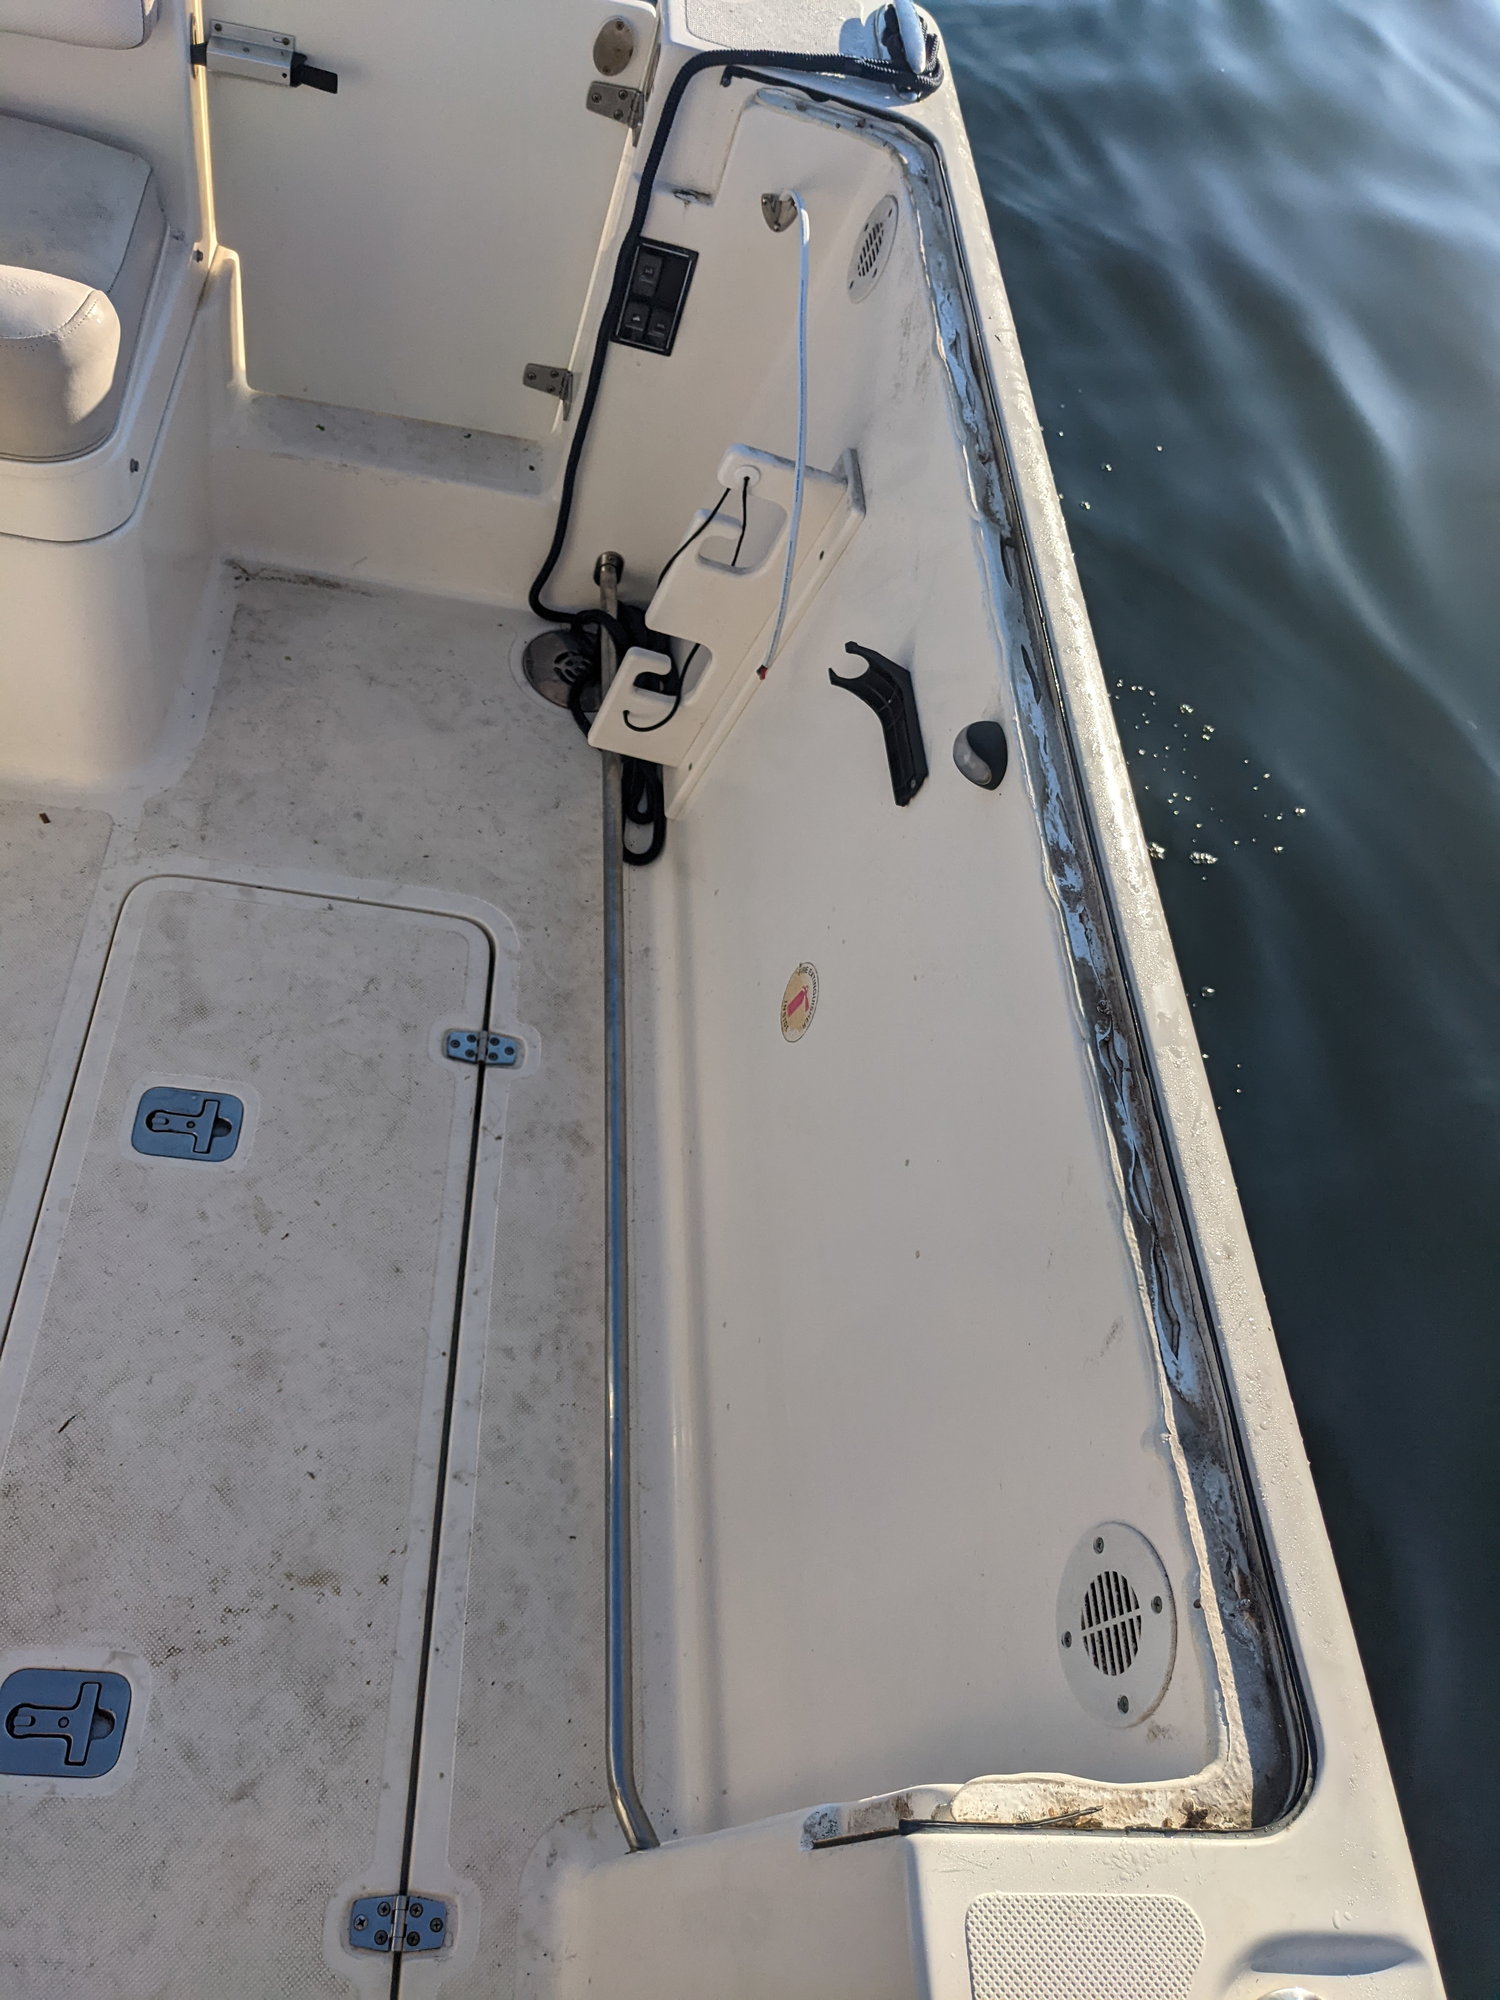 New Boater: Where should I mount my Downriggers? - The Hull Truth - Boating  and Fishing Forum